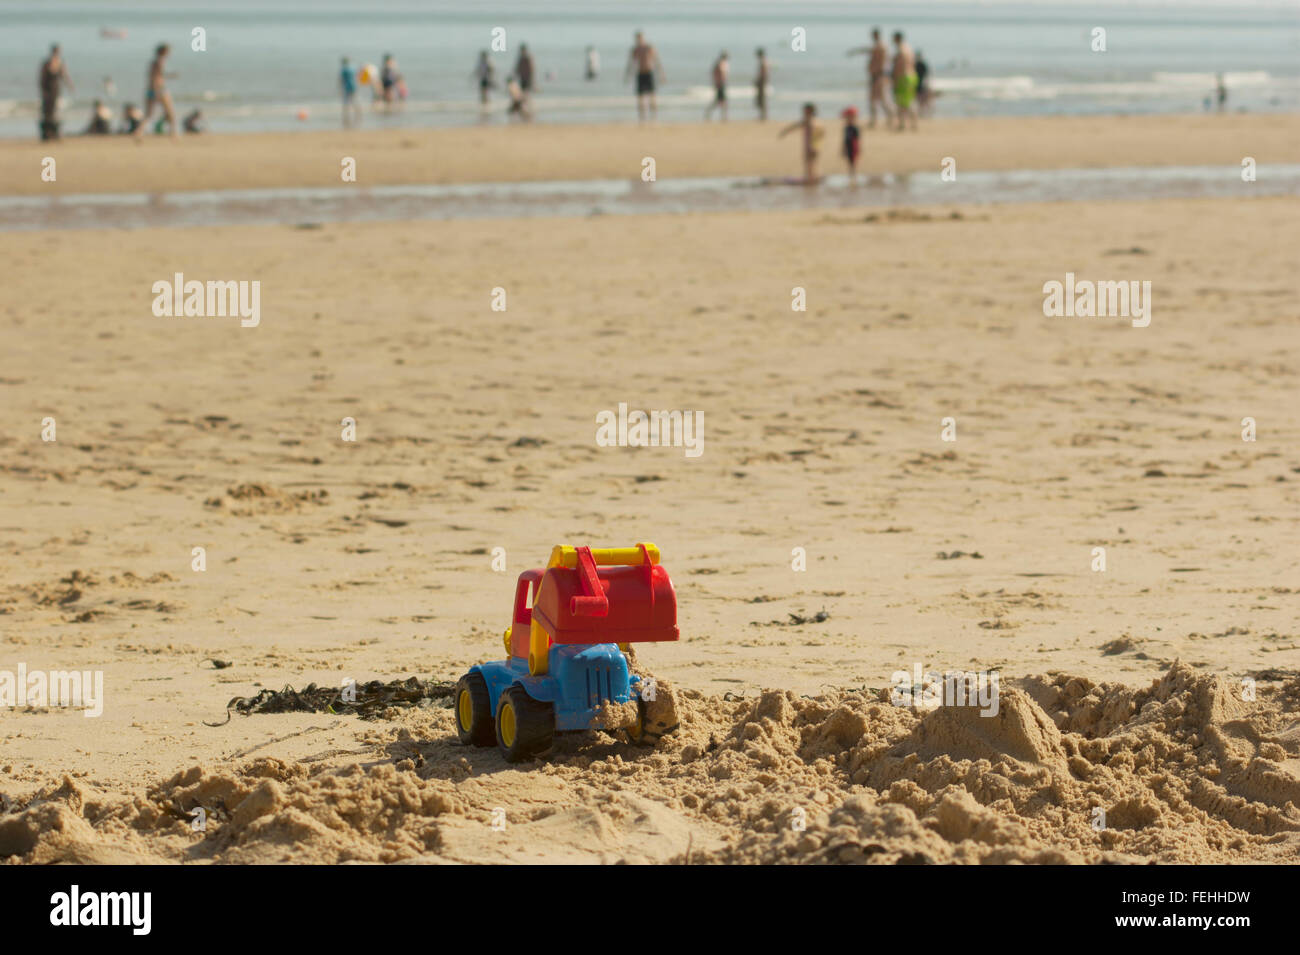 Child's digger toy on beach at Walton on the Naze, Essex , England , UK Stock Photo